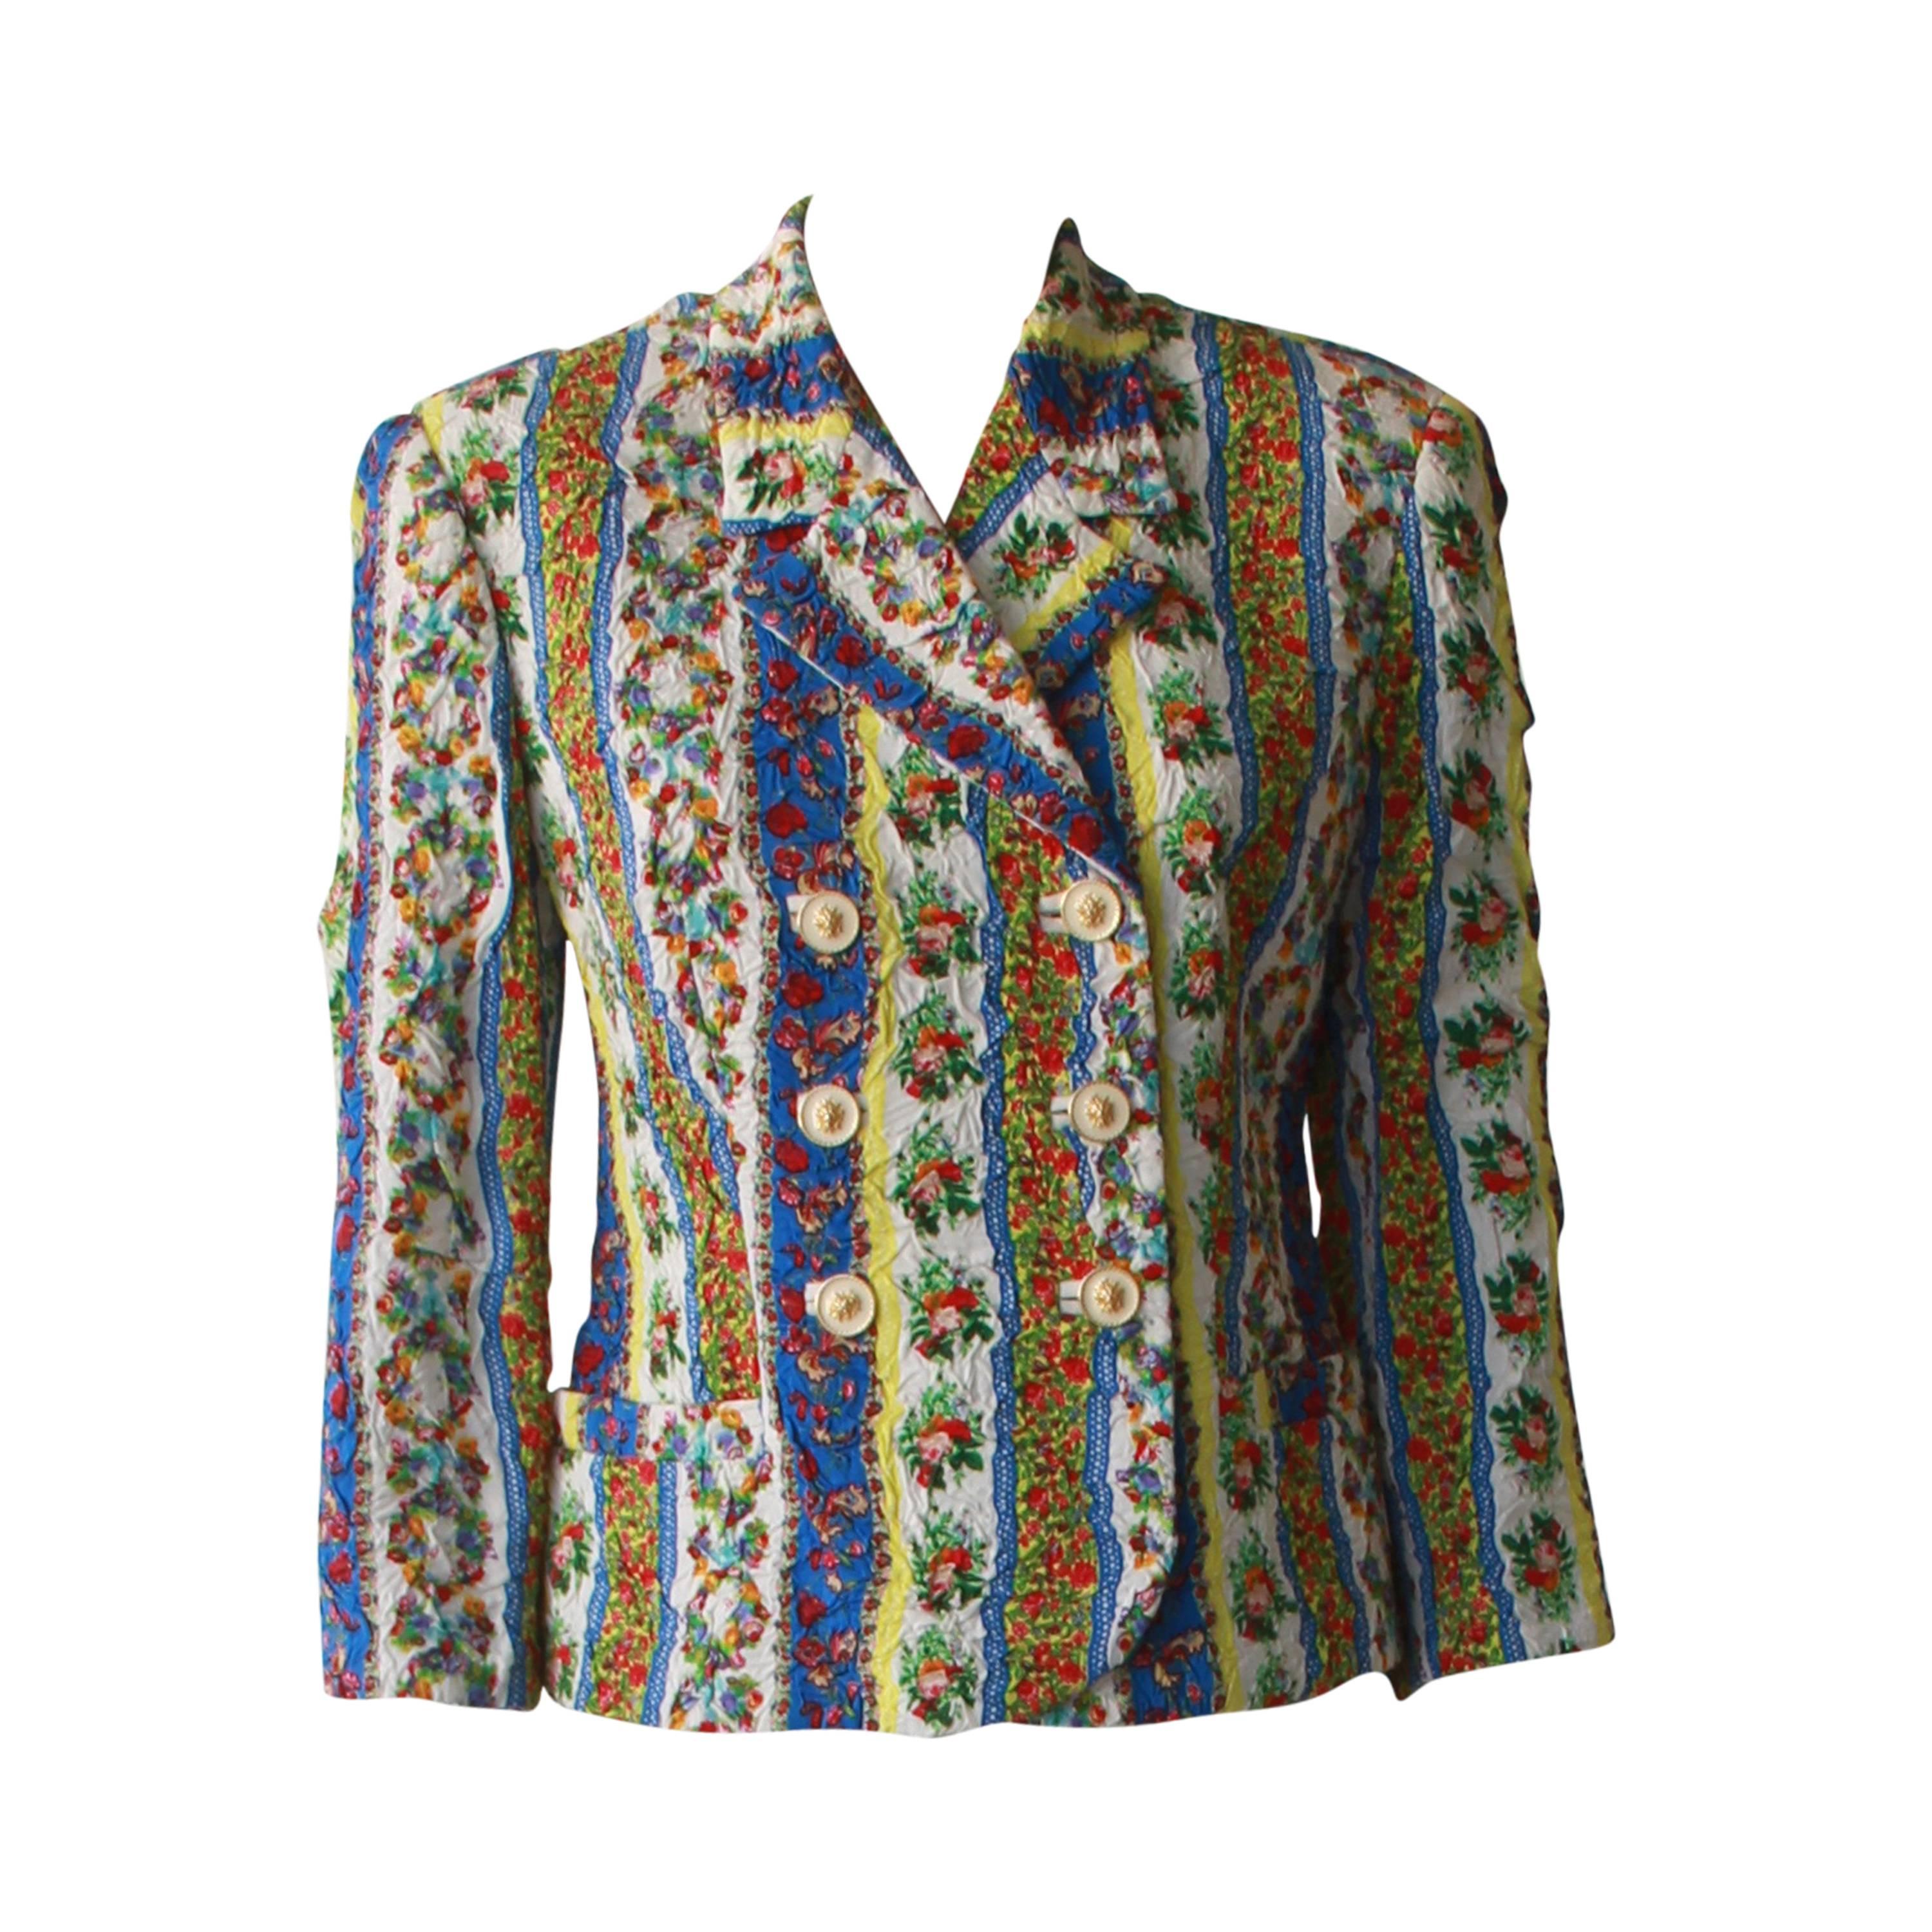 Gianni Versace Printed Jacket Spring 1994 For Sale